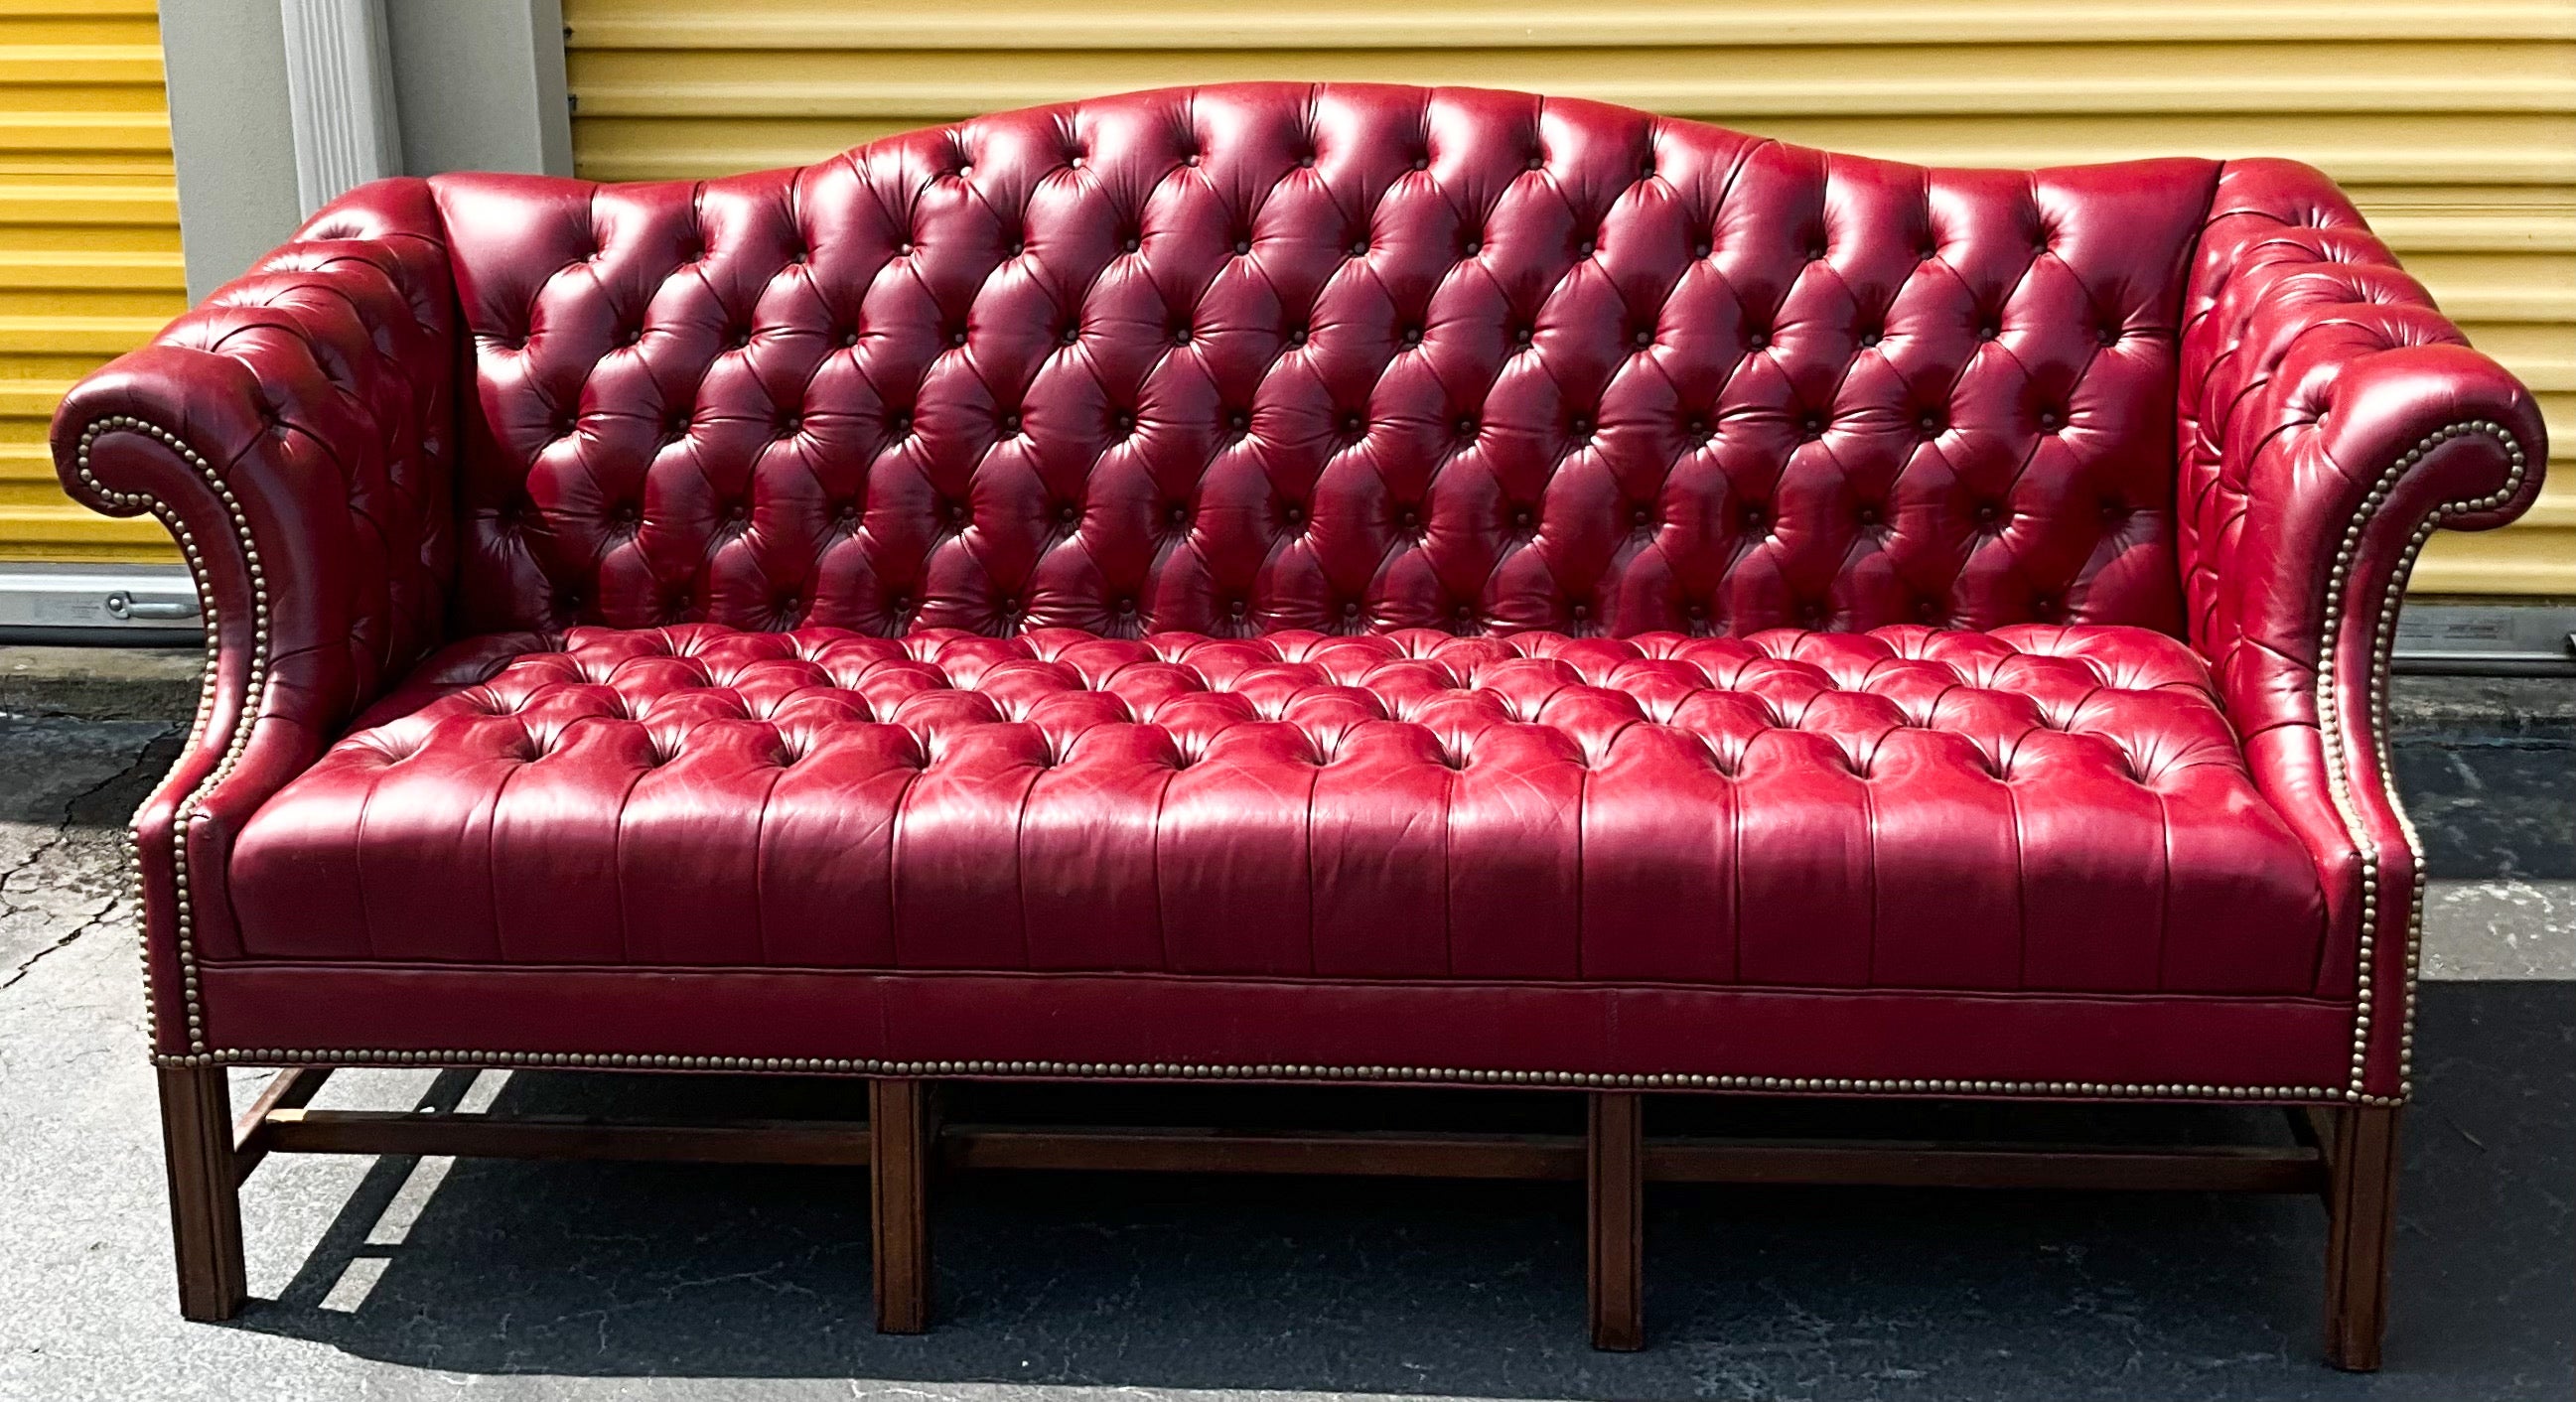 Wonderful color! This is an English style red tufted leather camelback sofa in very good condition. The wooden base is mahogany. The nailheads are brass. It most likely dates to the 60s/70s. 

My shipping is for the Continental US only and is